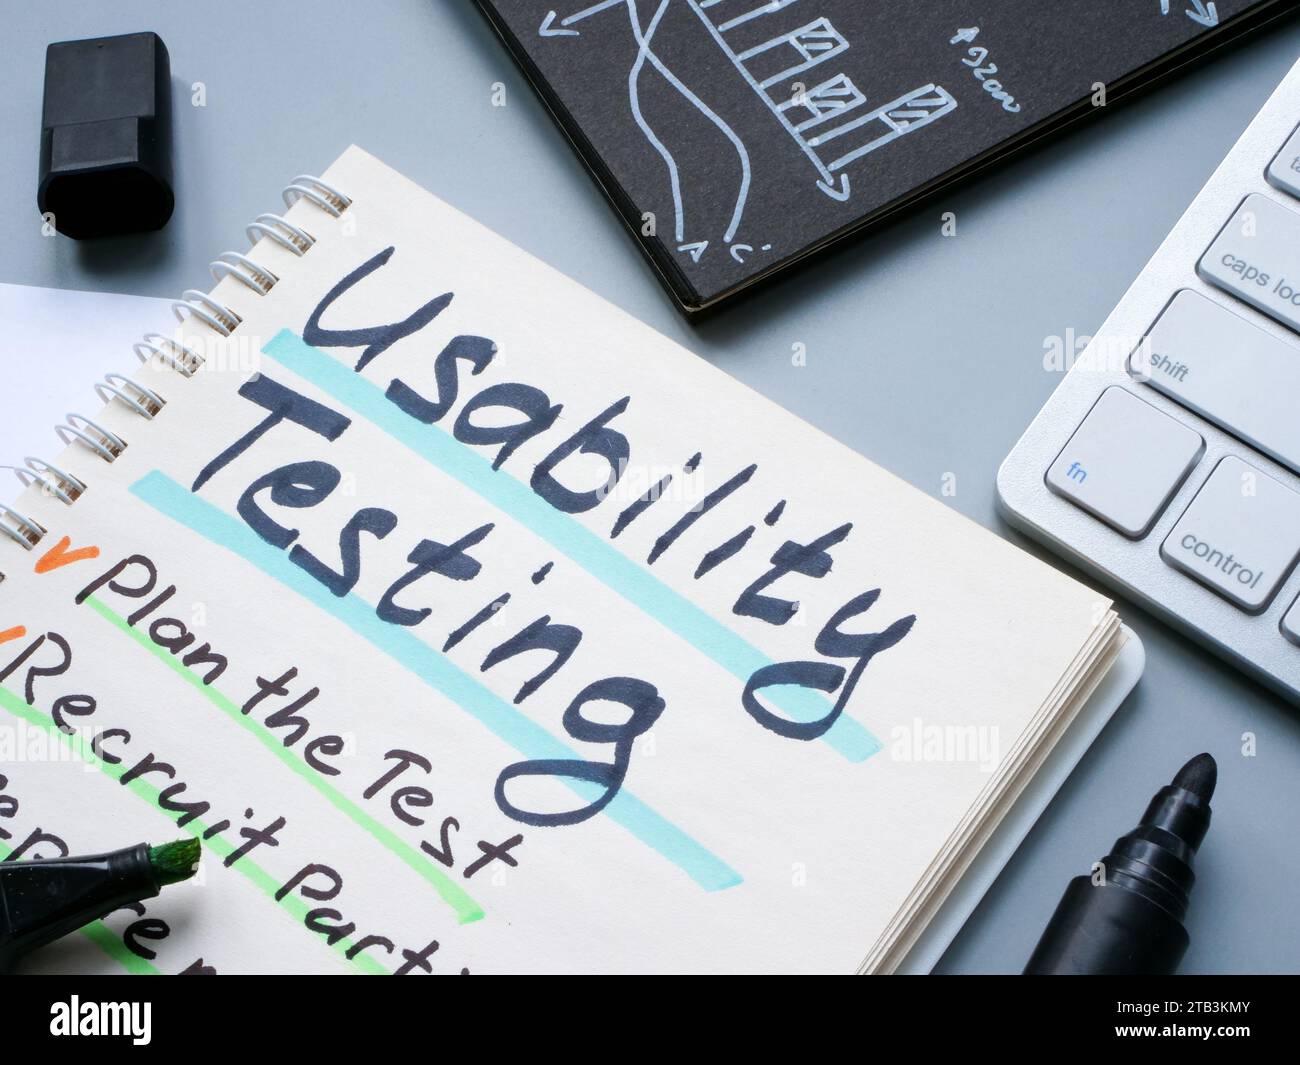 Usability testing plan in the notebook. Stock Photo